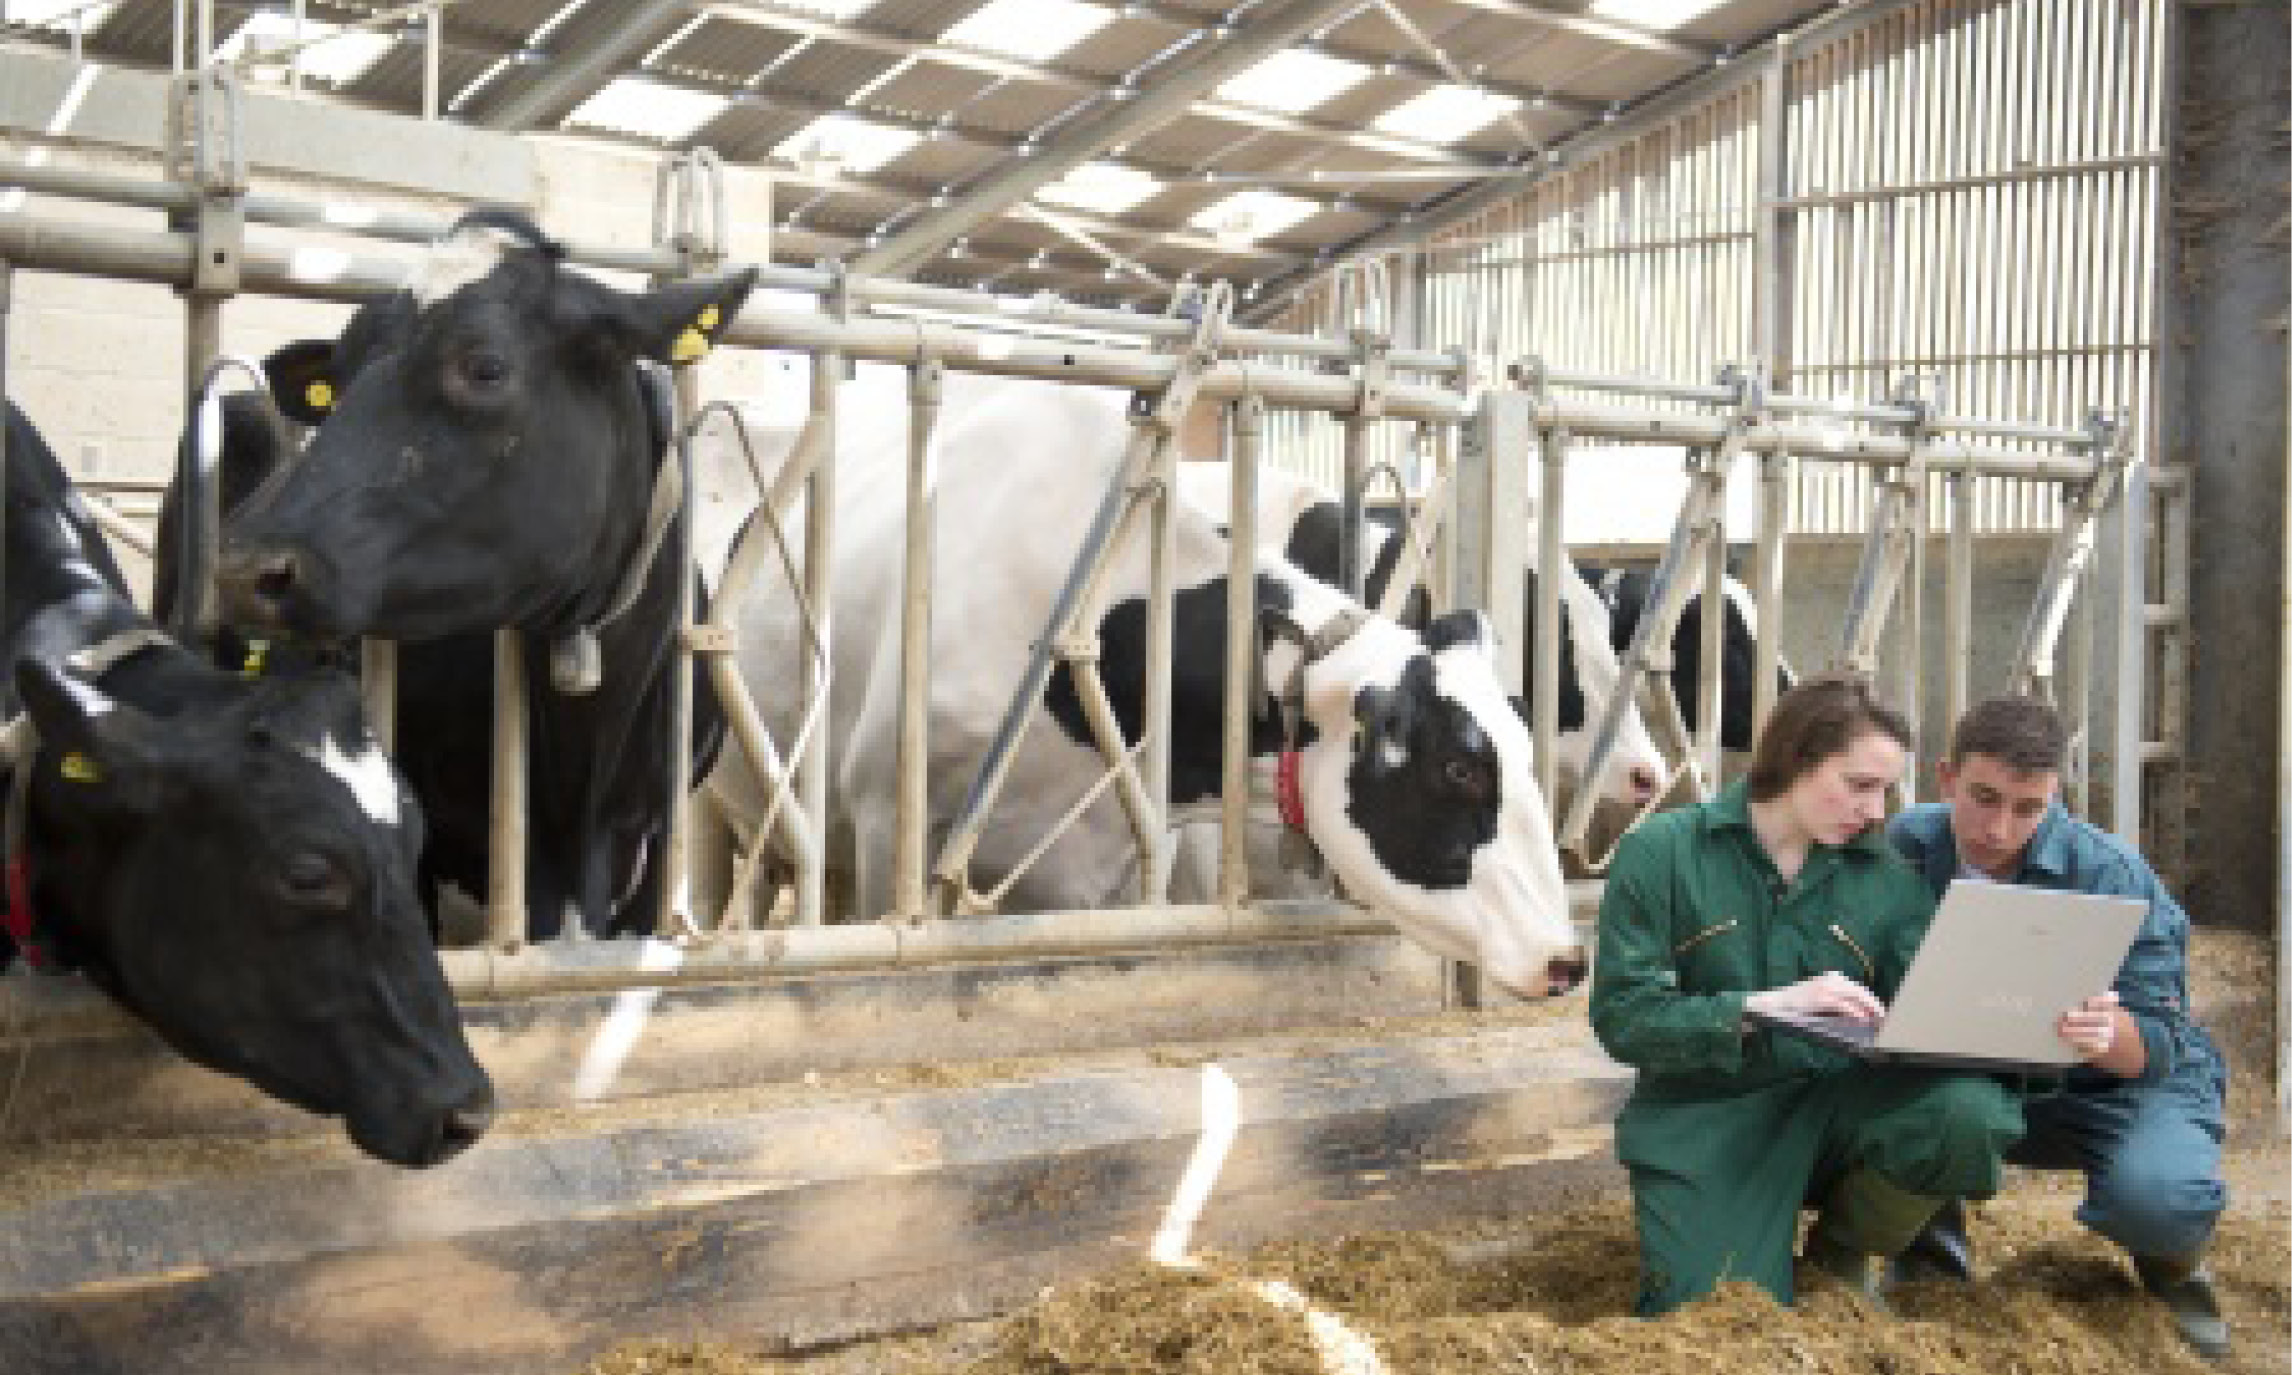 Image of dairy cows and students